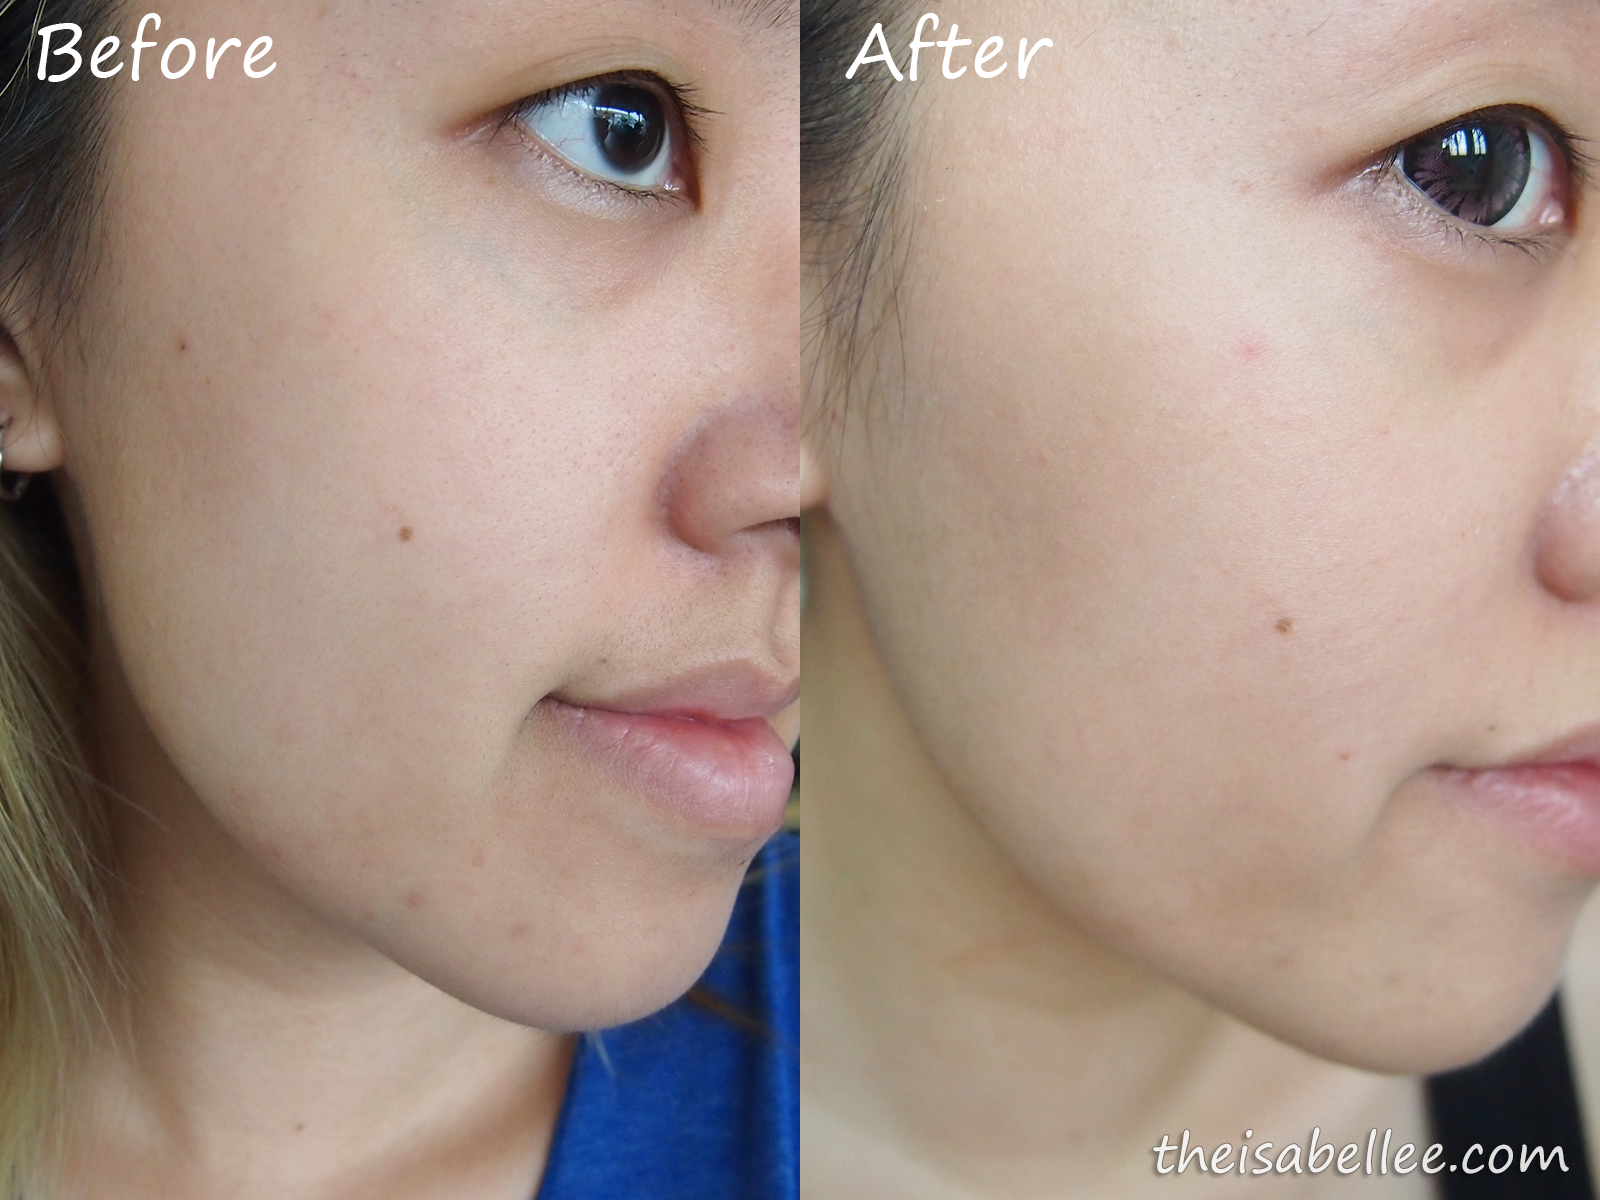 Results from using La Belle skincare